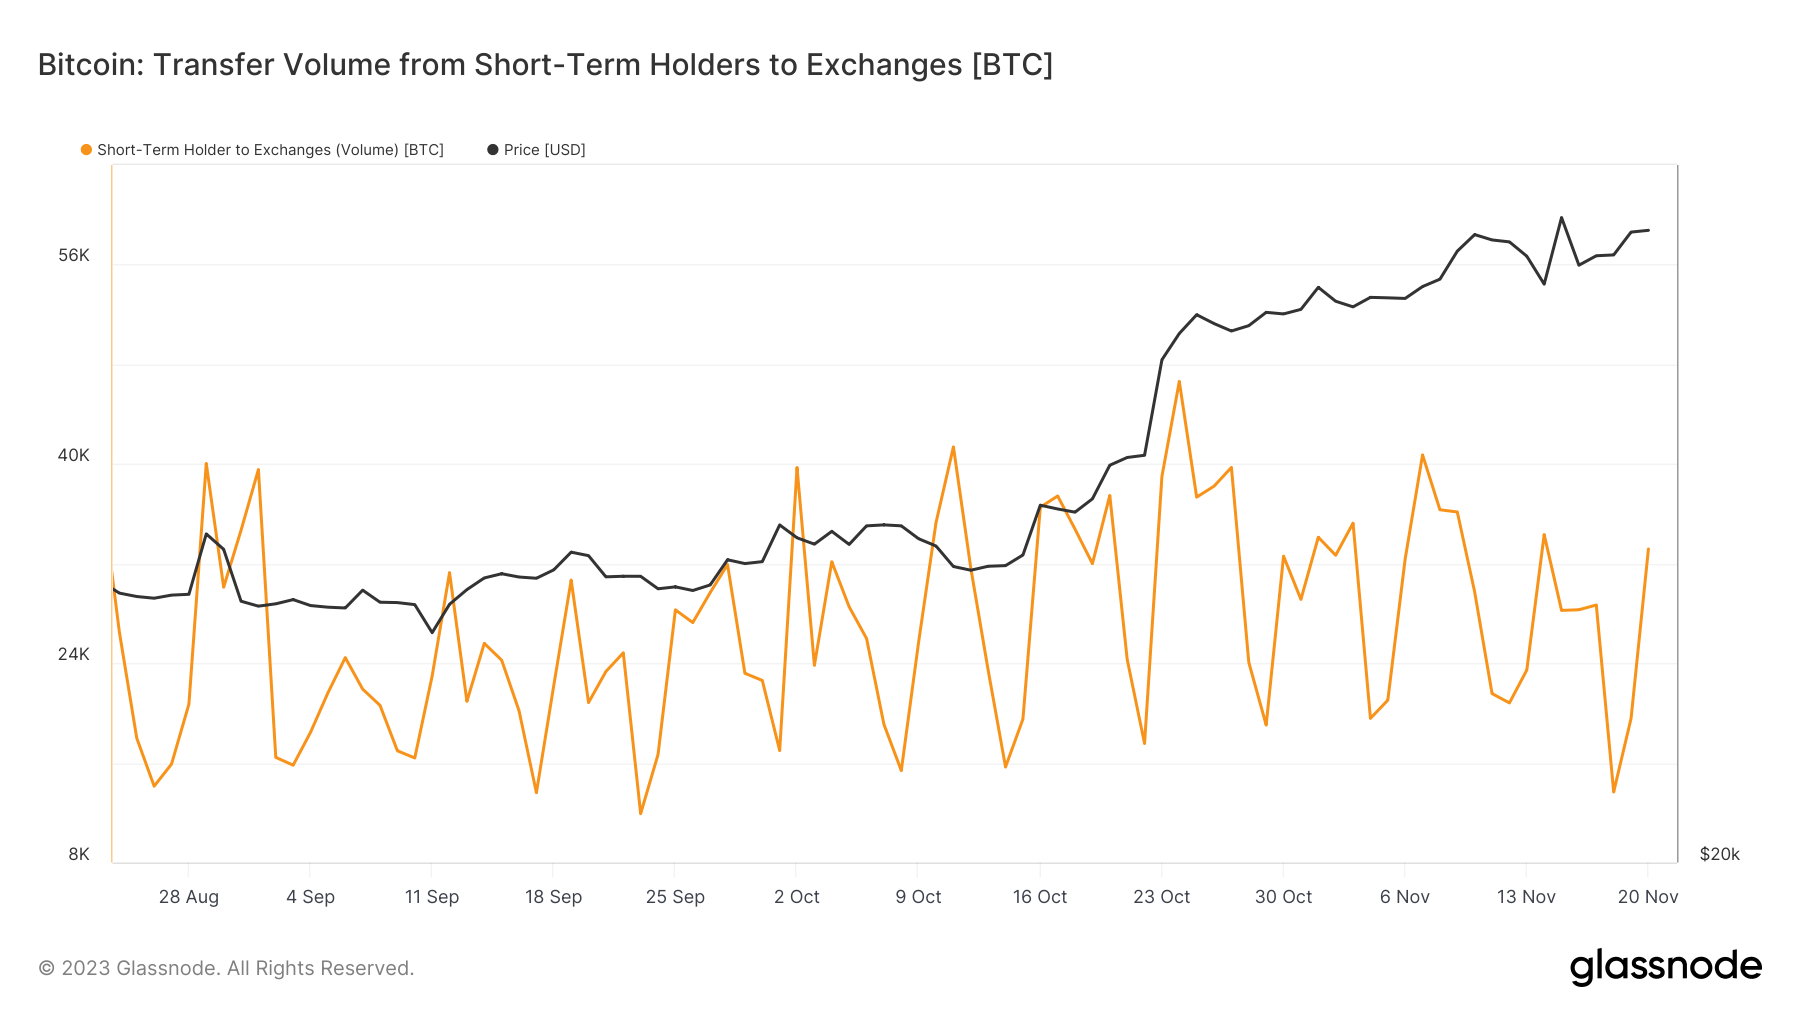 short term holders to exchanges transfer volume 3mo